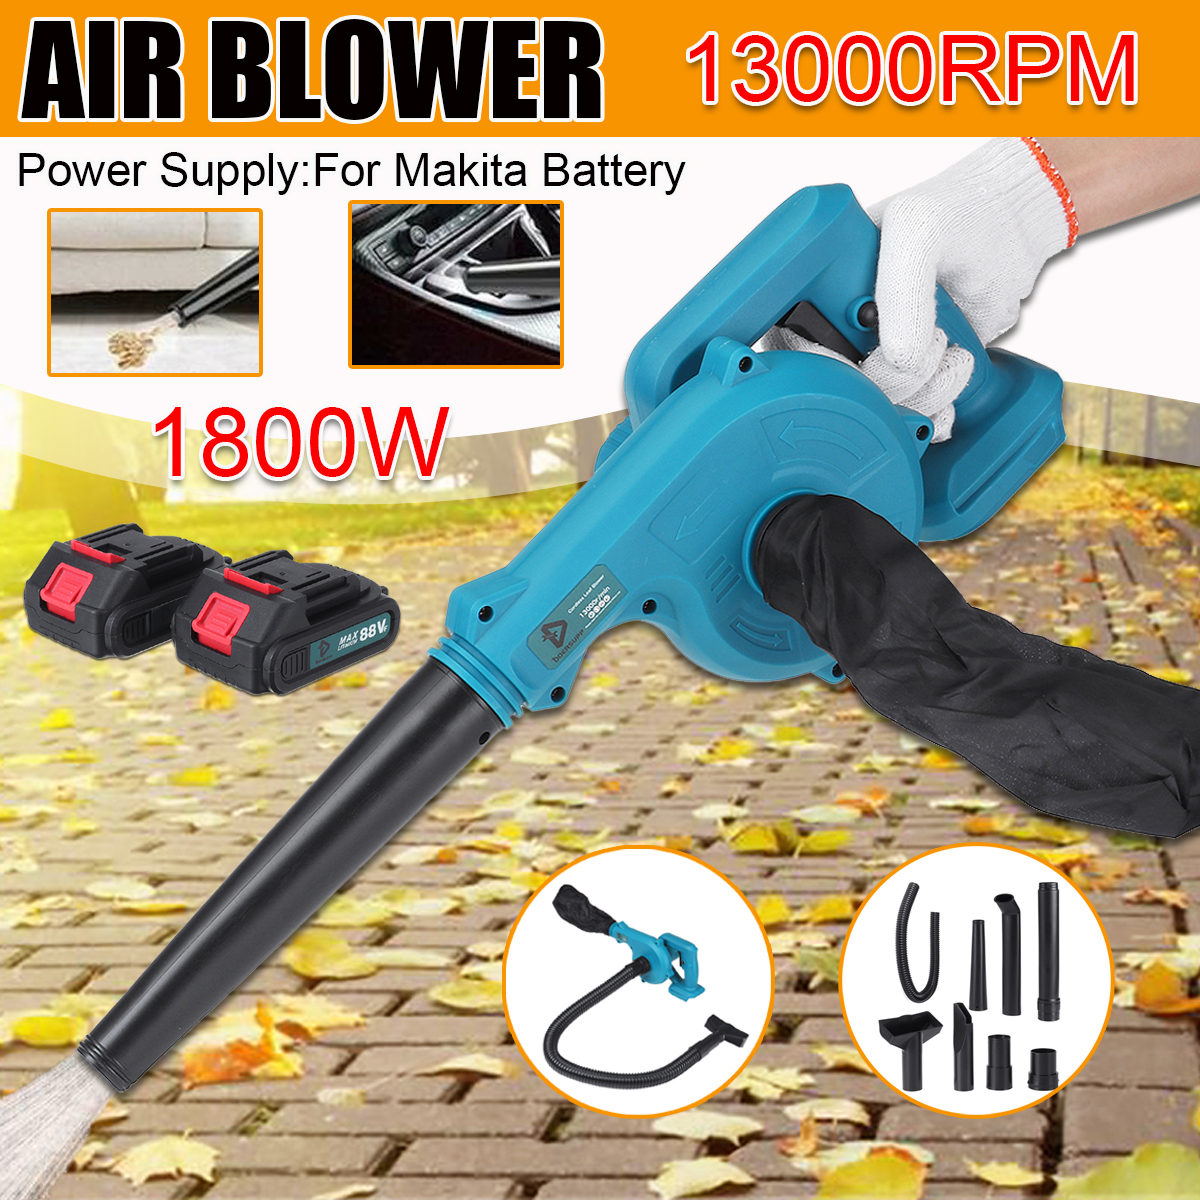 1800W-Electric-Blower-Cordless-Vacuum-Handhled-Cleaning-Tools-Dust-Blowing-Dust-Collector-Power-Tool-1912149-1